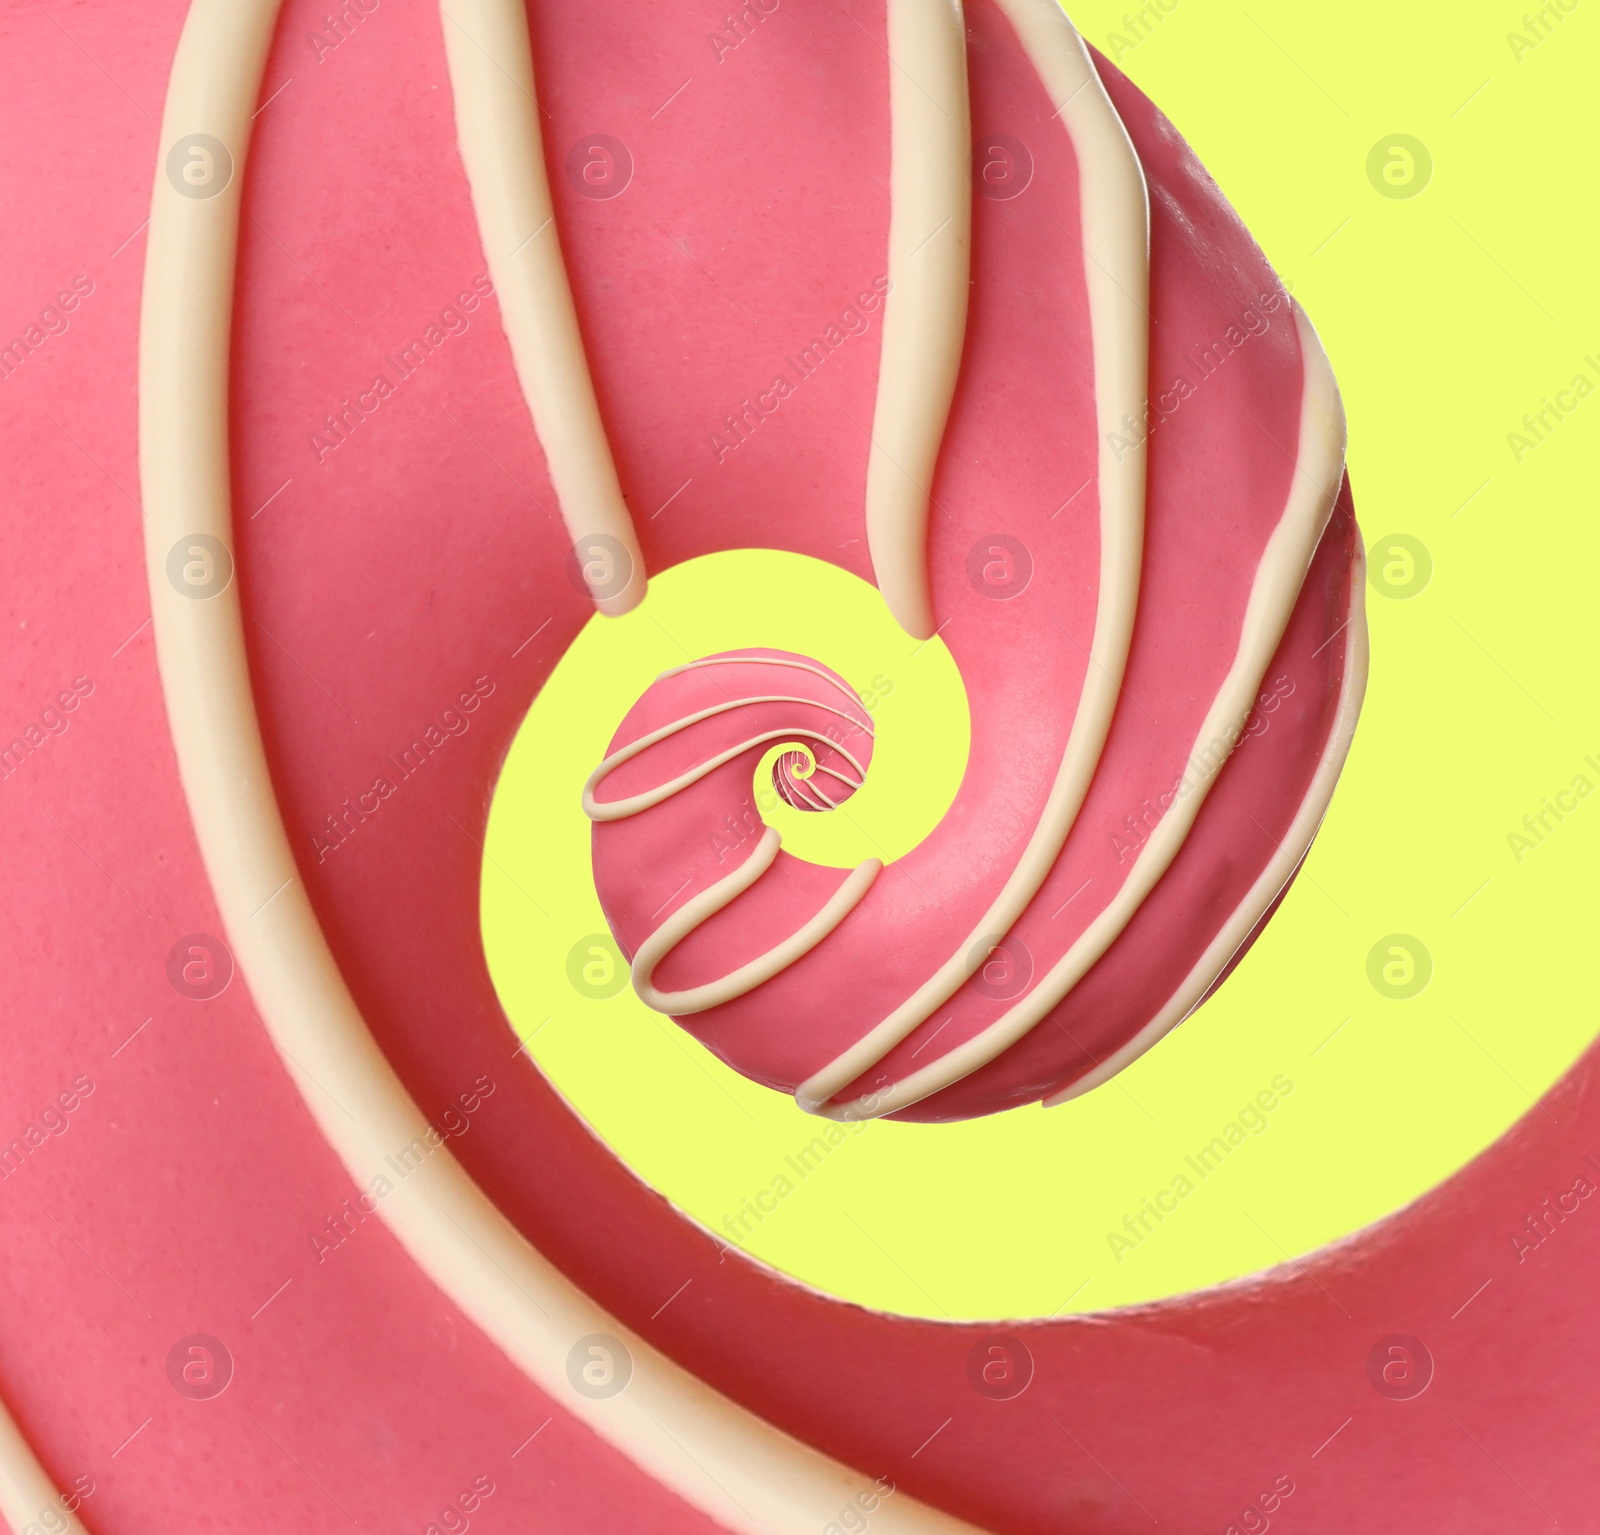 Image of Twisted donut with strawberry icing and topping on light yellow background, spiral effect